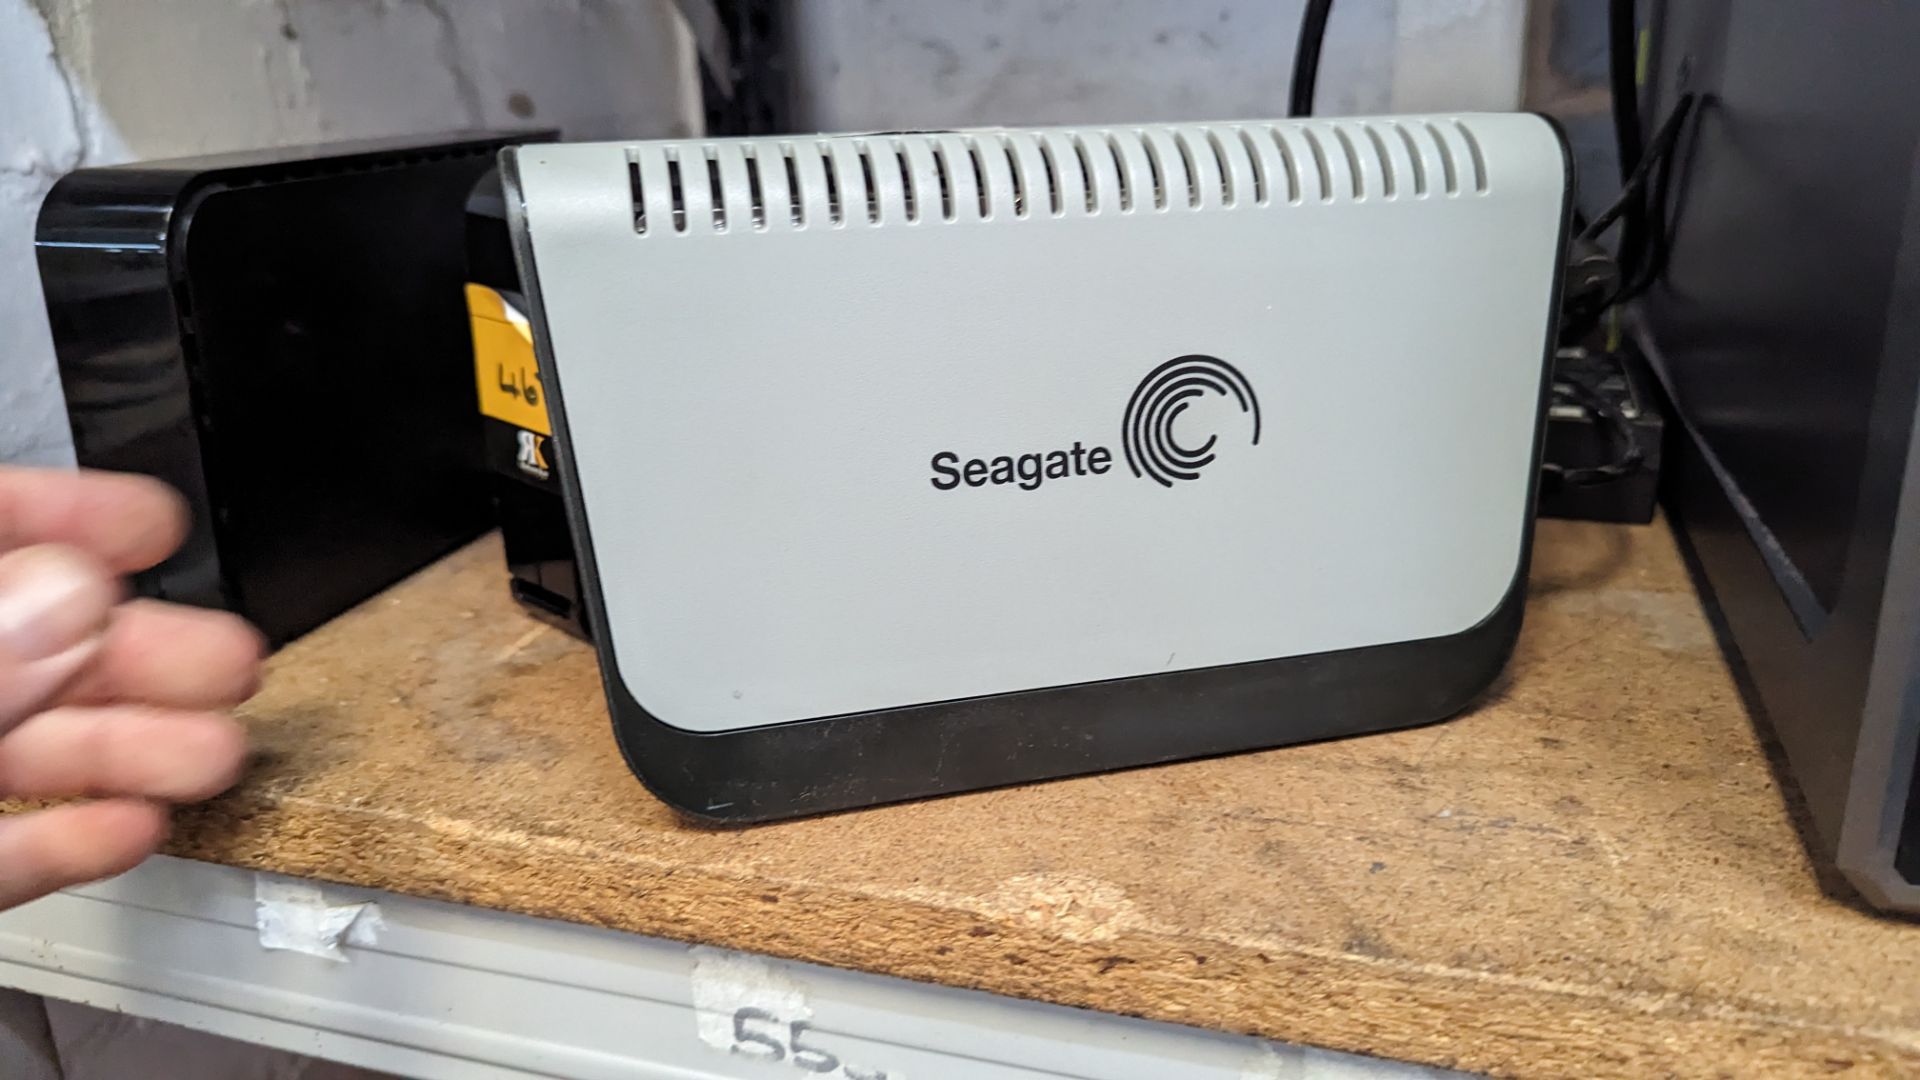 Seagate external hard drive - Image 3 of 7